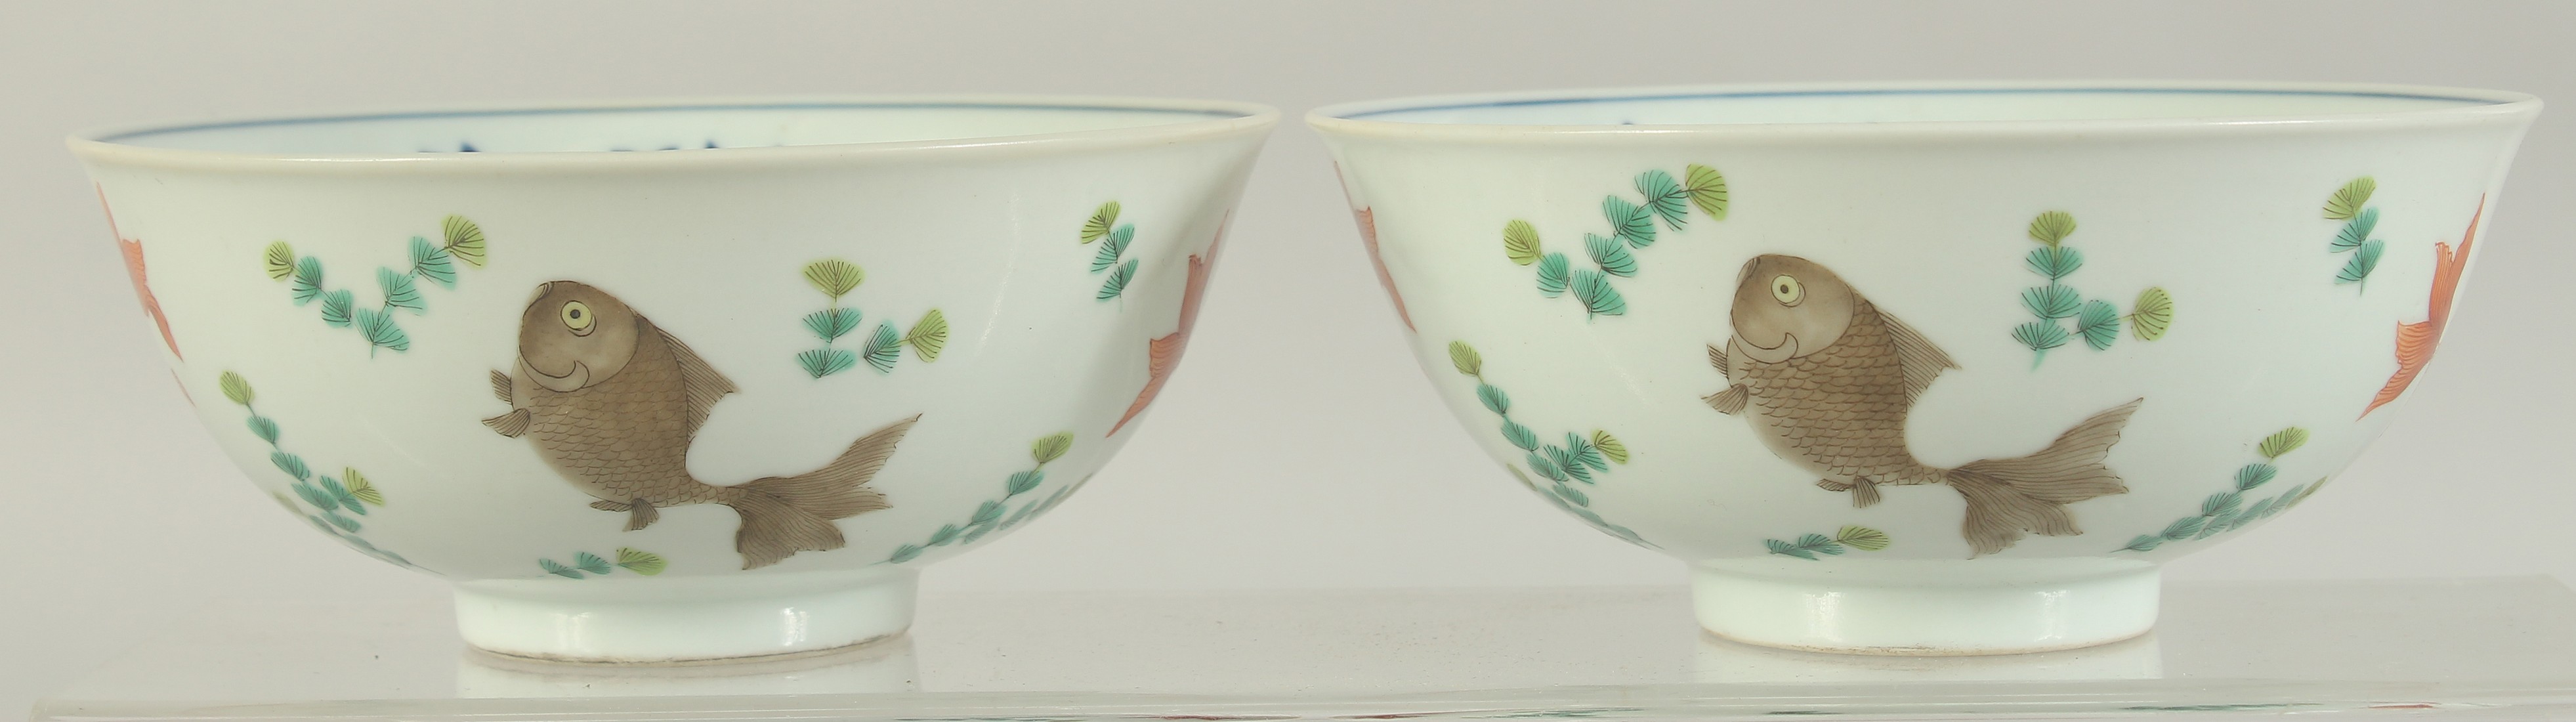 A PAIR OF CHINESE FAMILLE ROSE PORCELAIN BOWLS, the exterior painted with coral red fish, the - Image 2 of 9